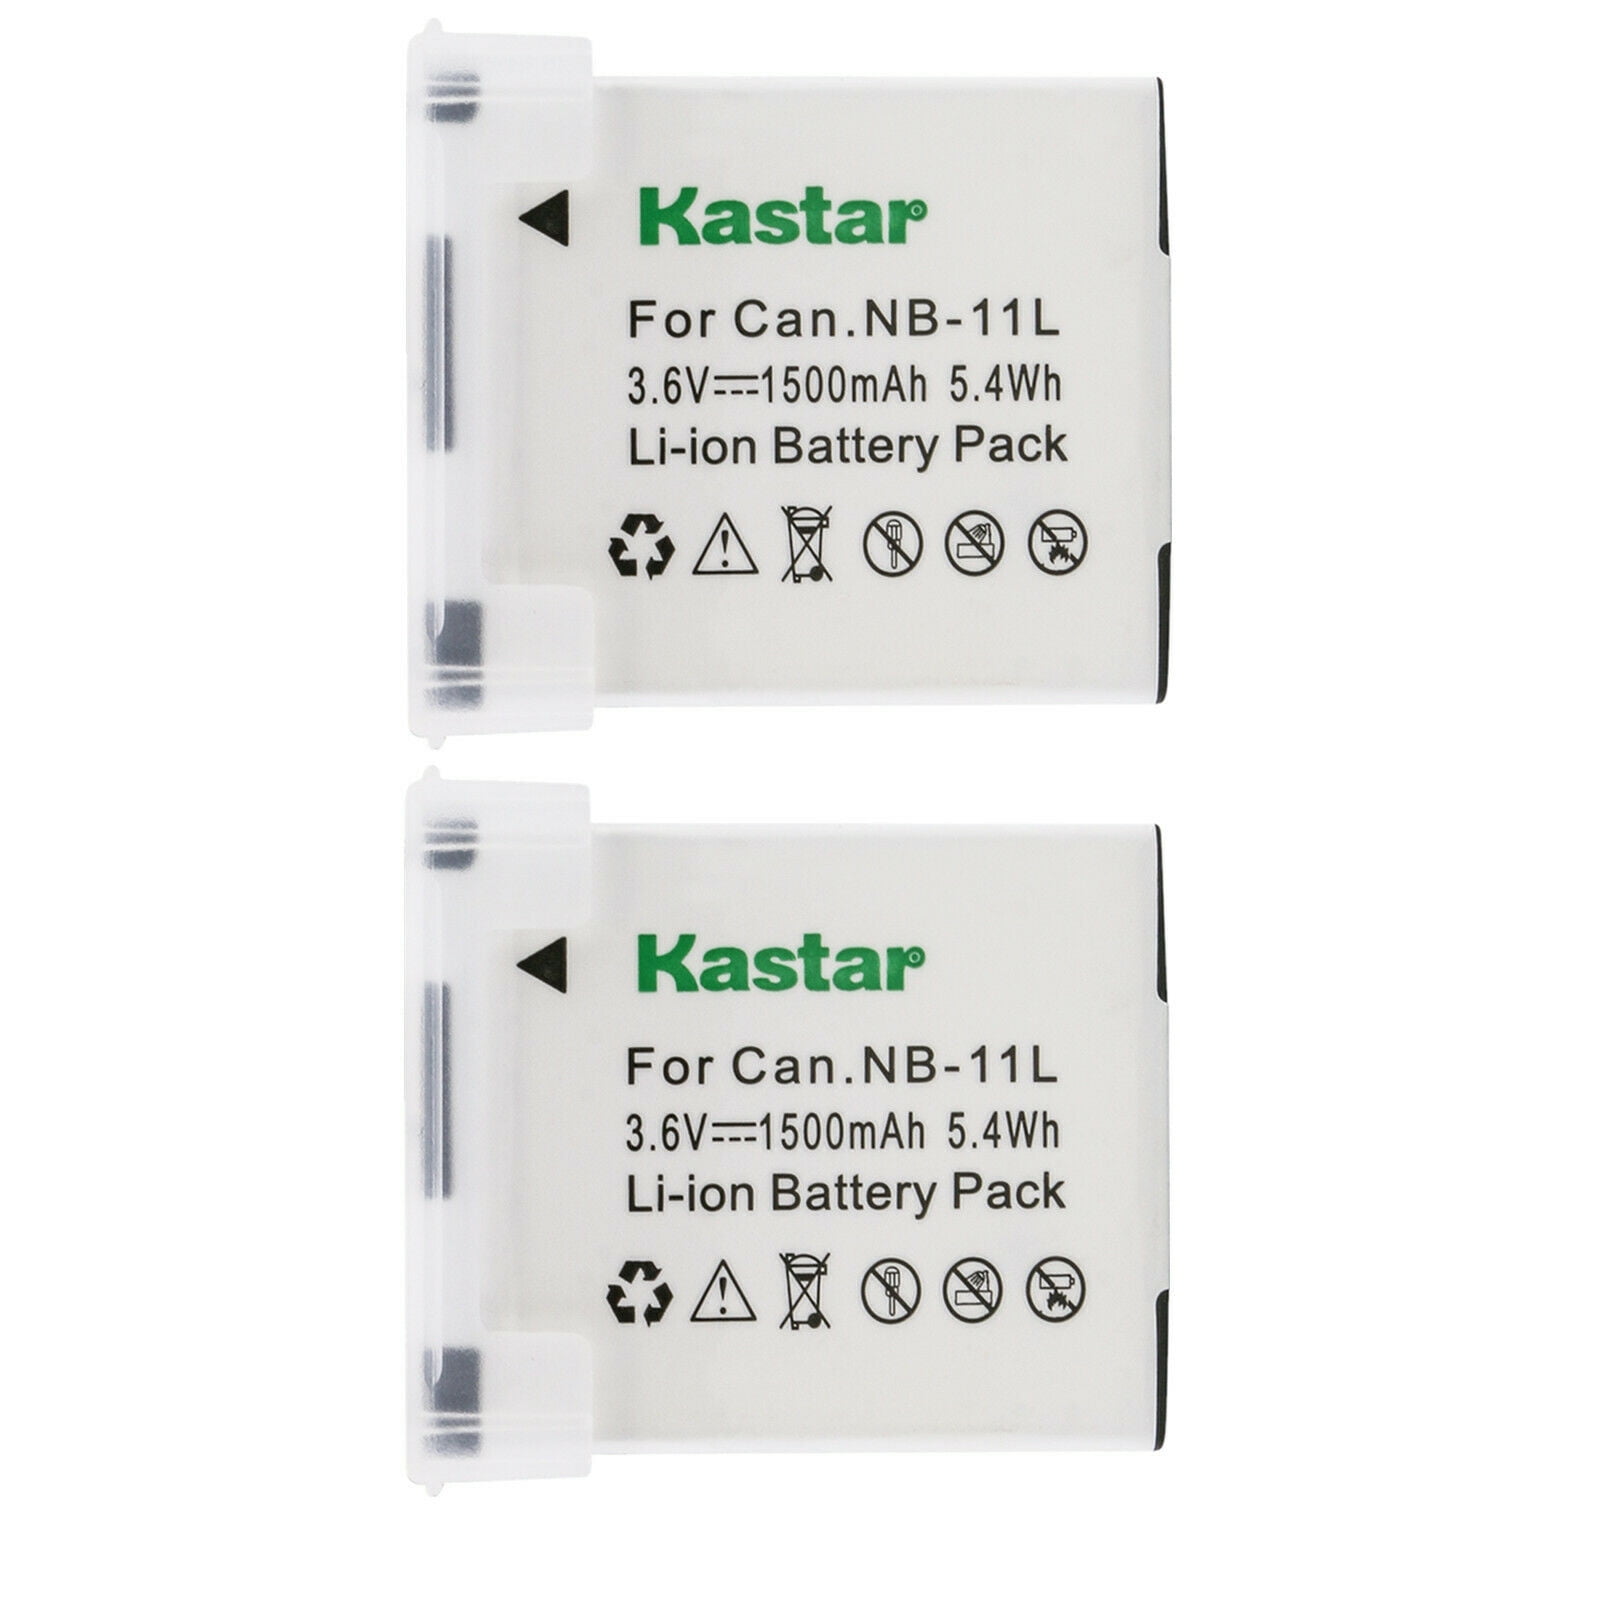  Kastar 2-Pack LB-060 Battery and Charger Replacement for Kodak  PixPro AZ522 AZ521, Kodak PixPro AZ501, Kodak PixPro AZ421, Kodak PixPro  AZ365 AZ362 AZ361, Kodak PixPro AZ525 AZ526, Kodak PixPro AZ251 